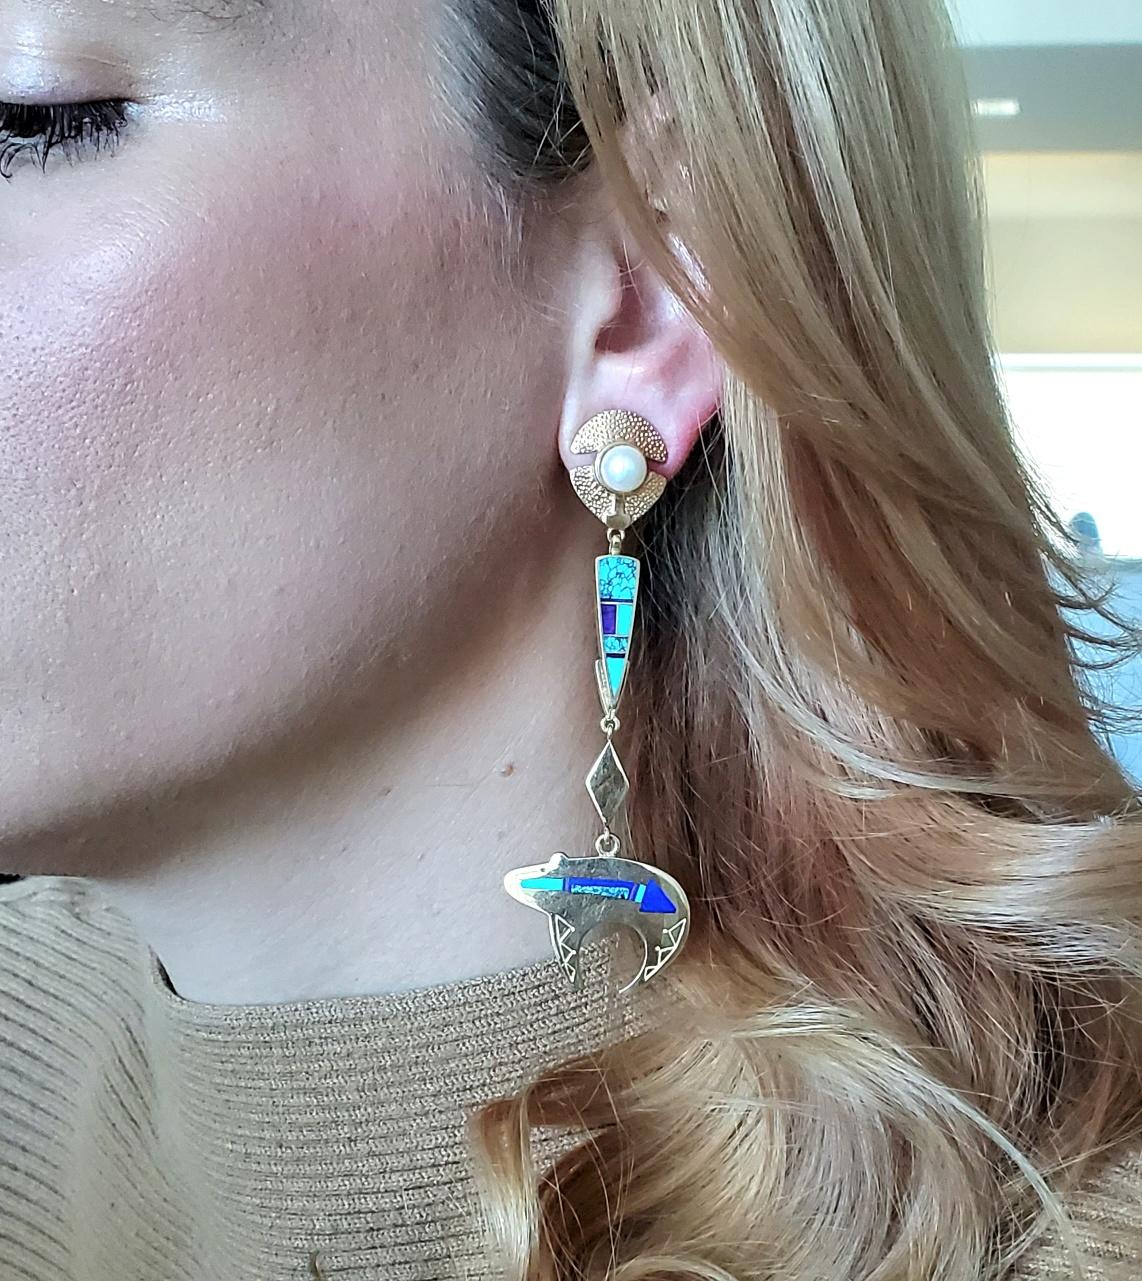 Dangle Drop Earrings designed by Ray Tracey & Knifewing Segura.

Gorgeous colorful pair of Native American (Southwestern) style dangle drop earrings with bears, designed by the Apache goldsmith Knifewing Segura and the Navajo Ray Tracey. The unusual